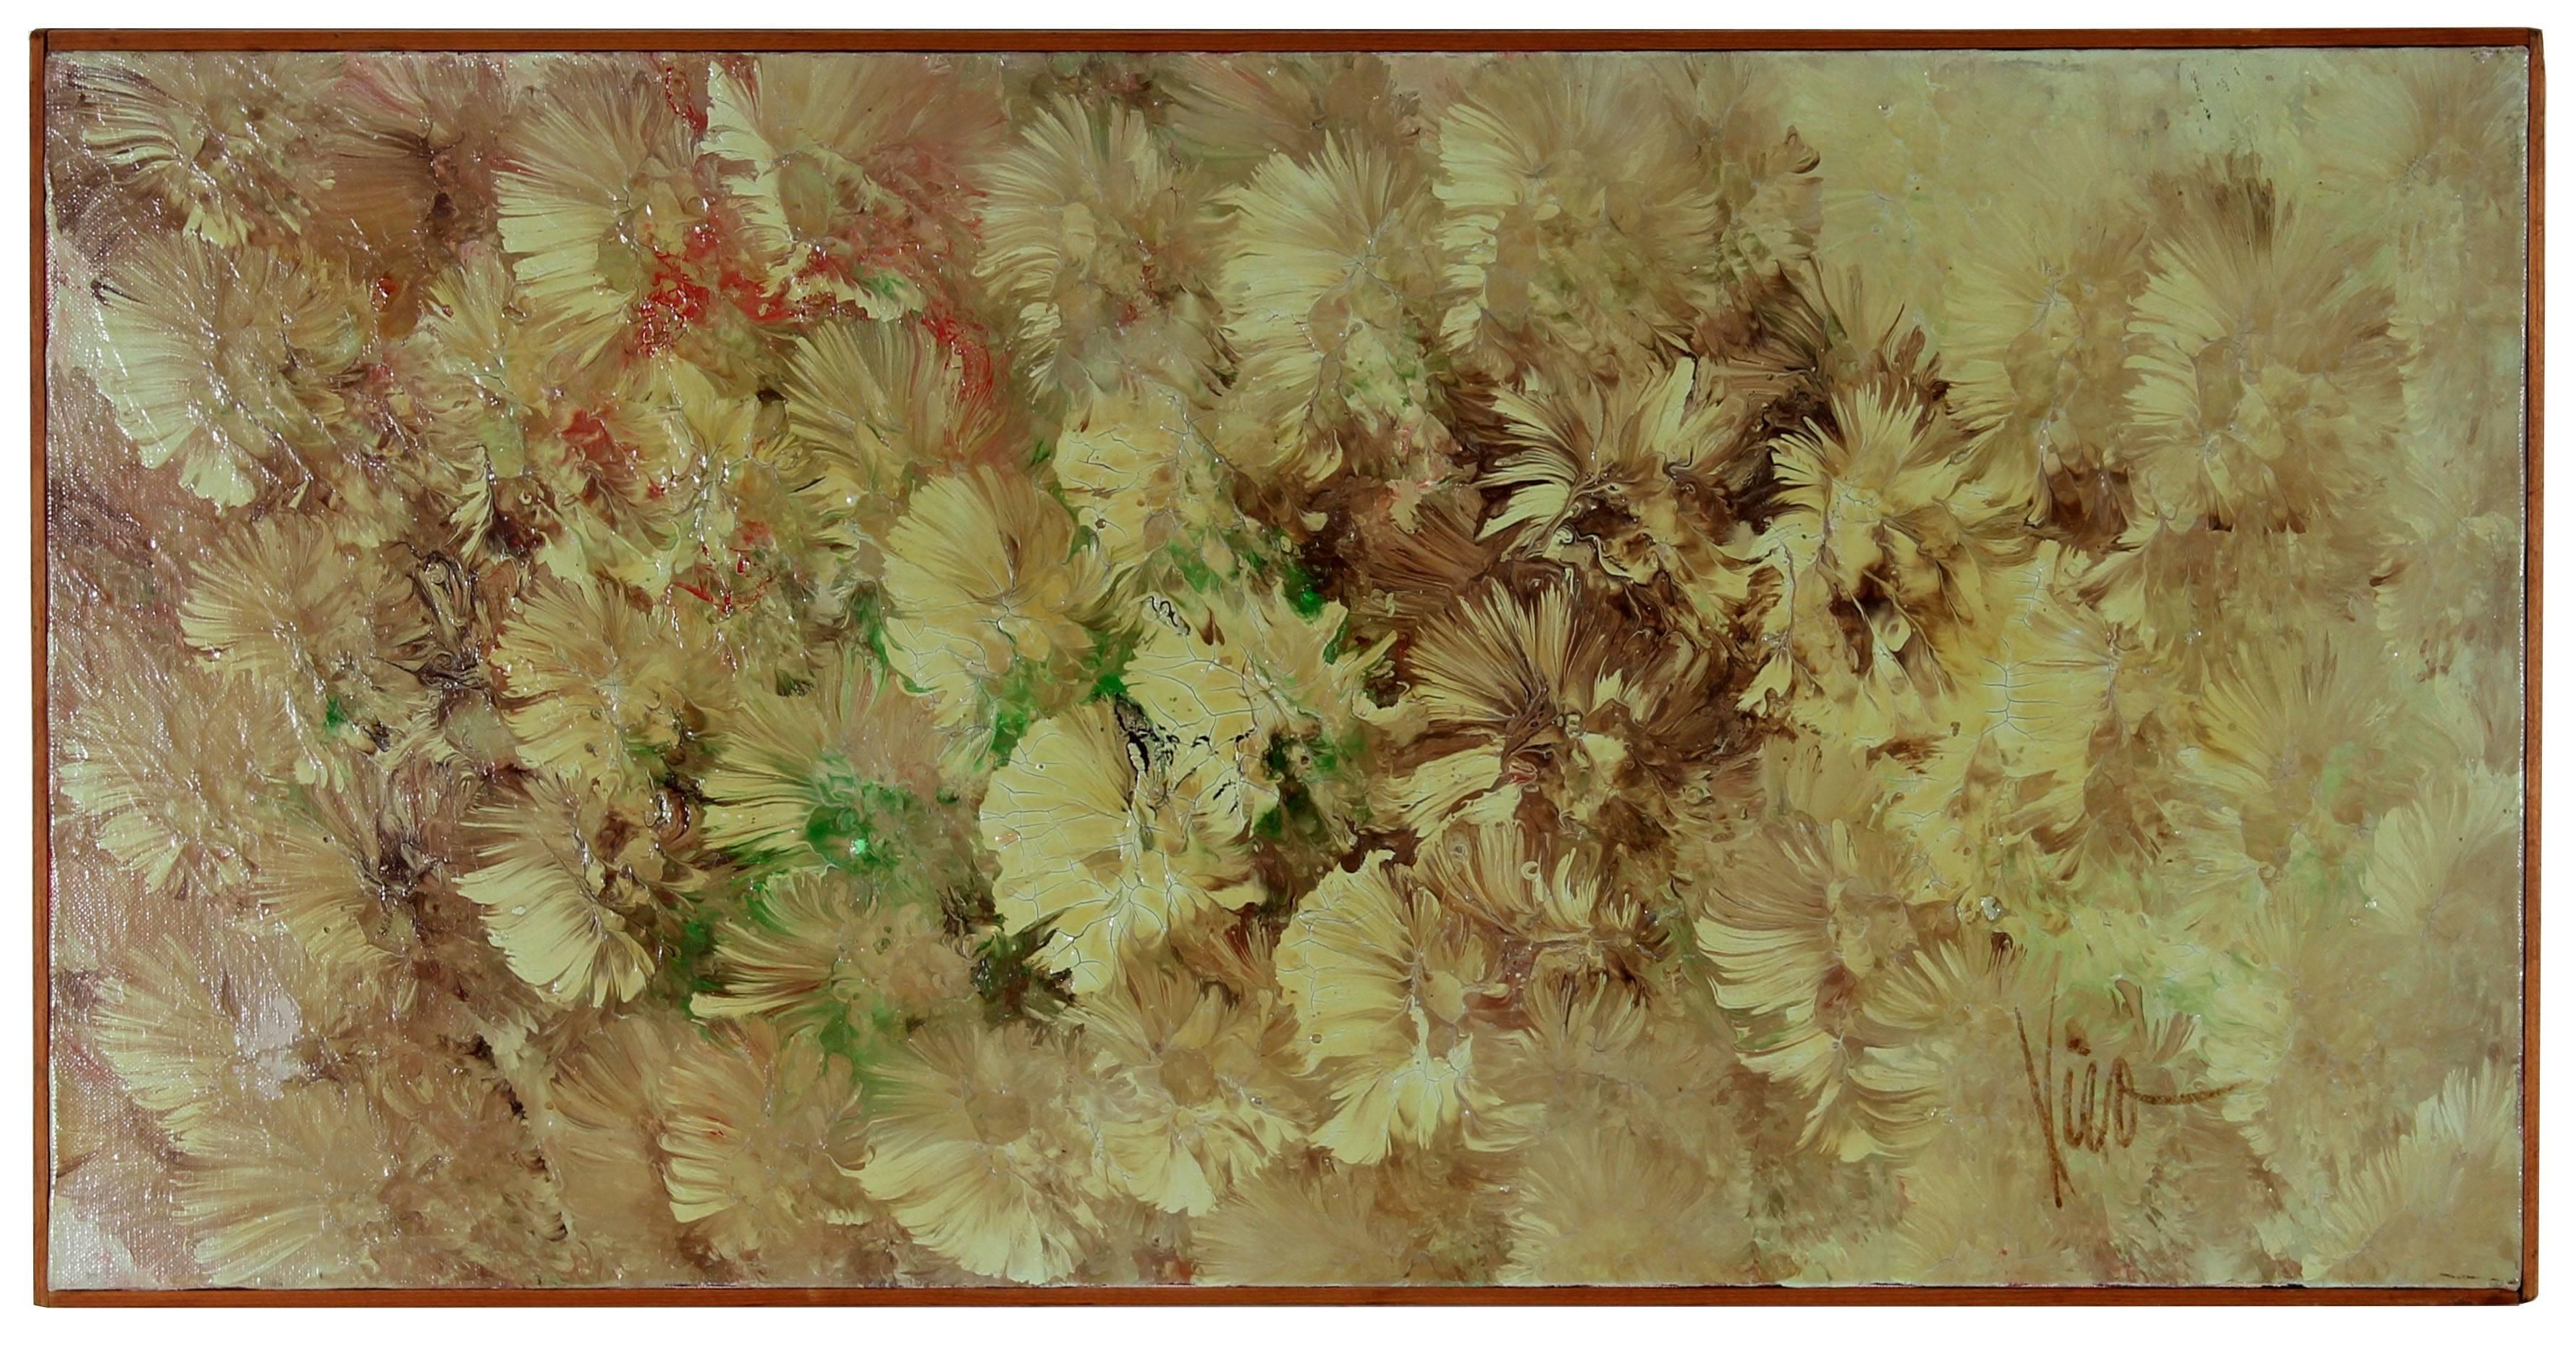 Wiveca Rubinow Landscape Painting - "September Gardens", Floral Abstract in Oil, 1960s